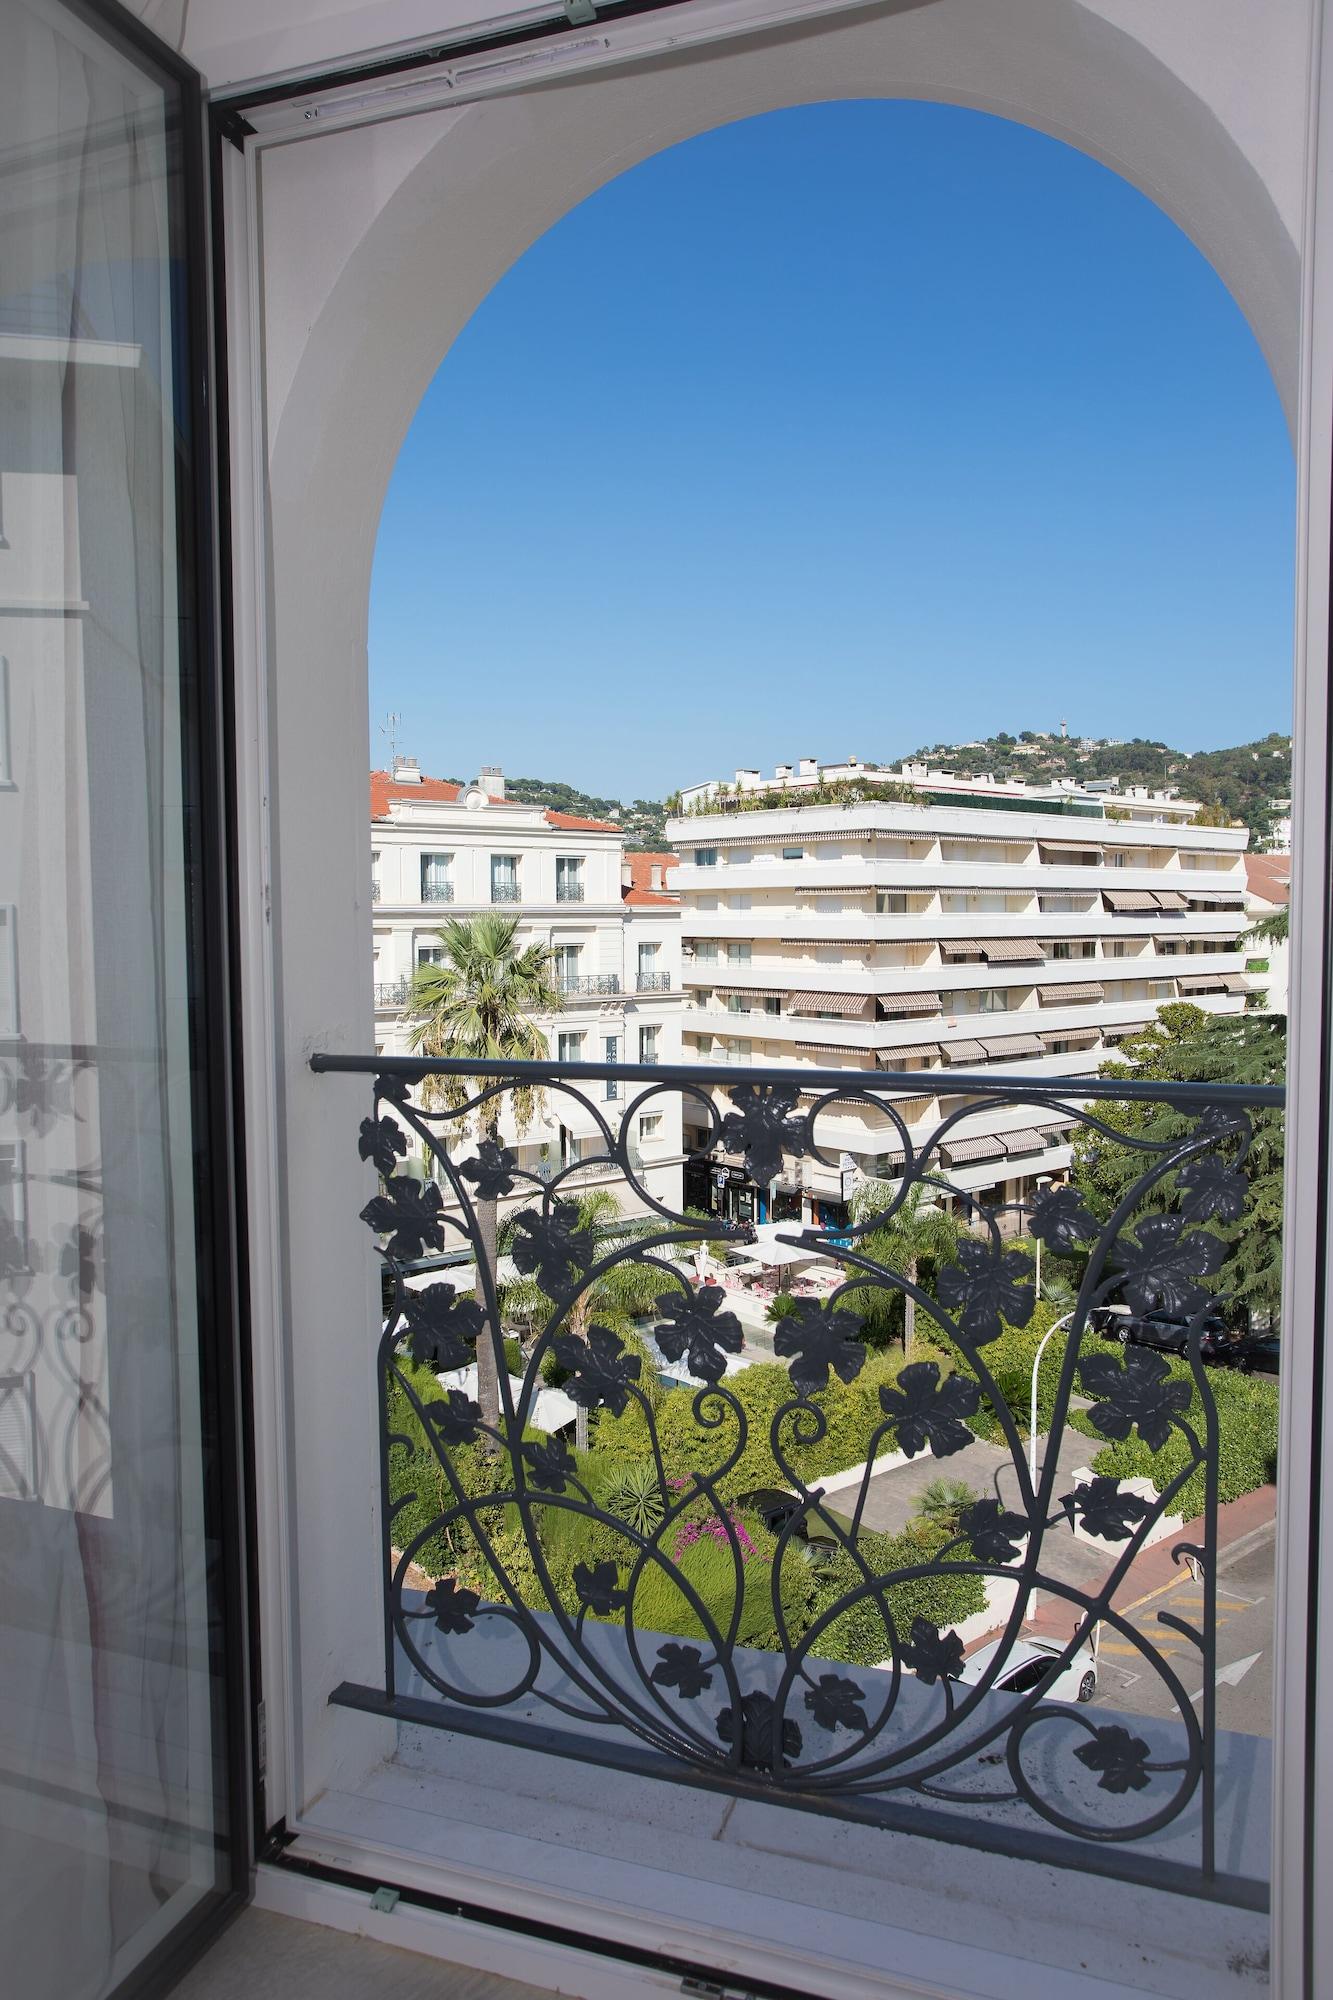 Cristal Hotel & Spa Cannes Exterior photo